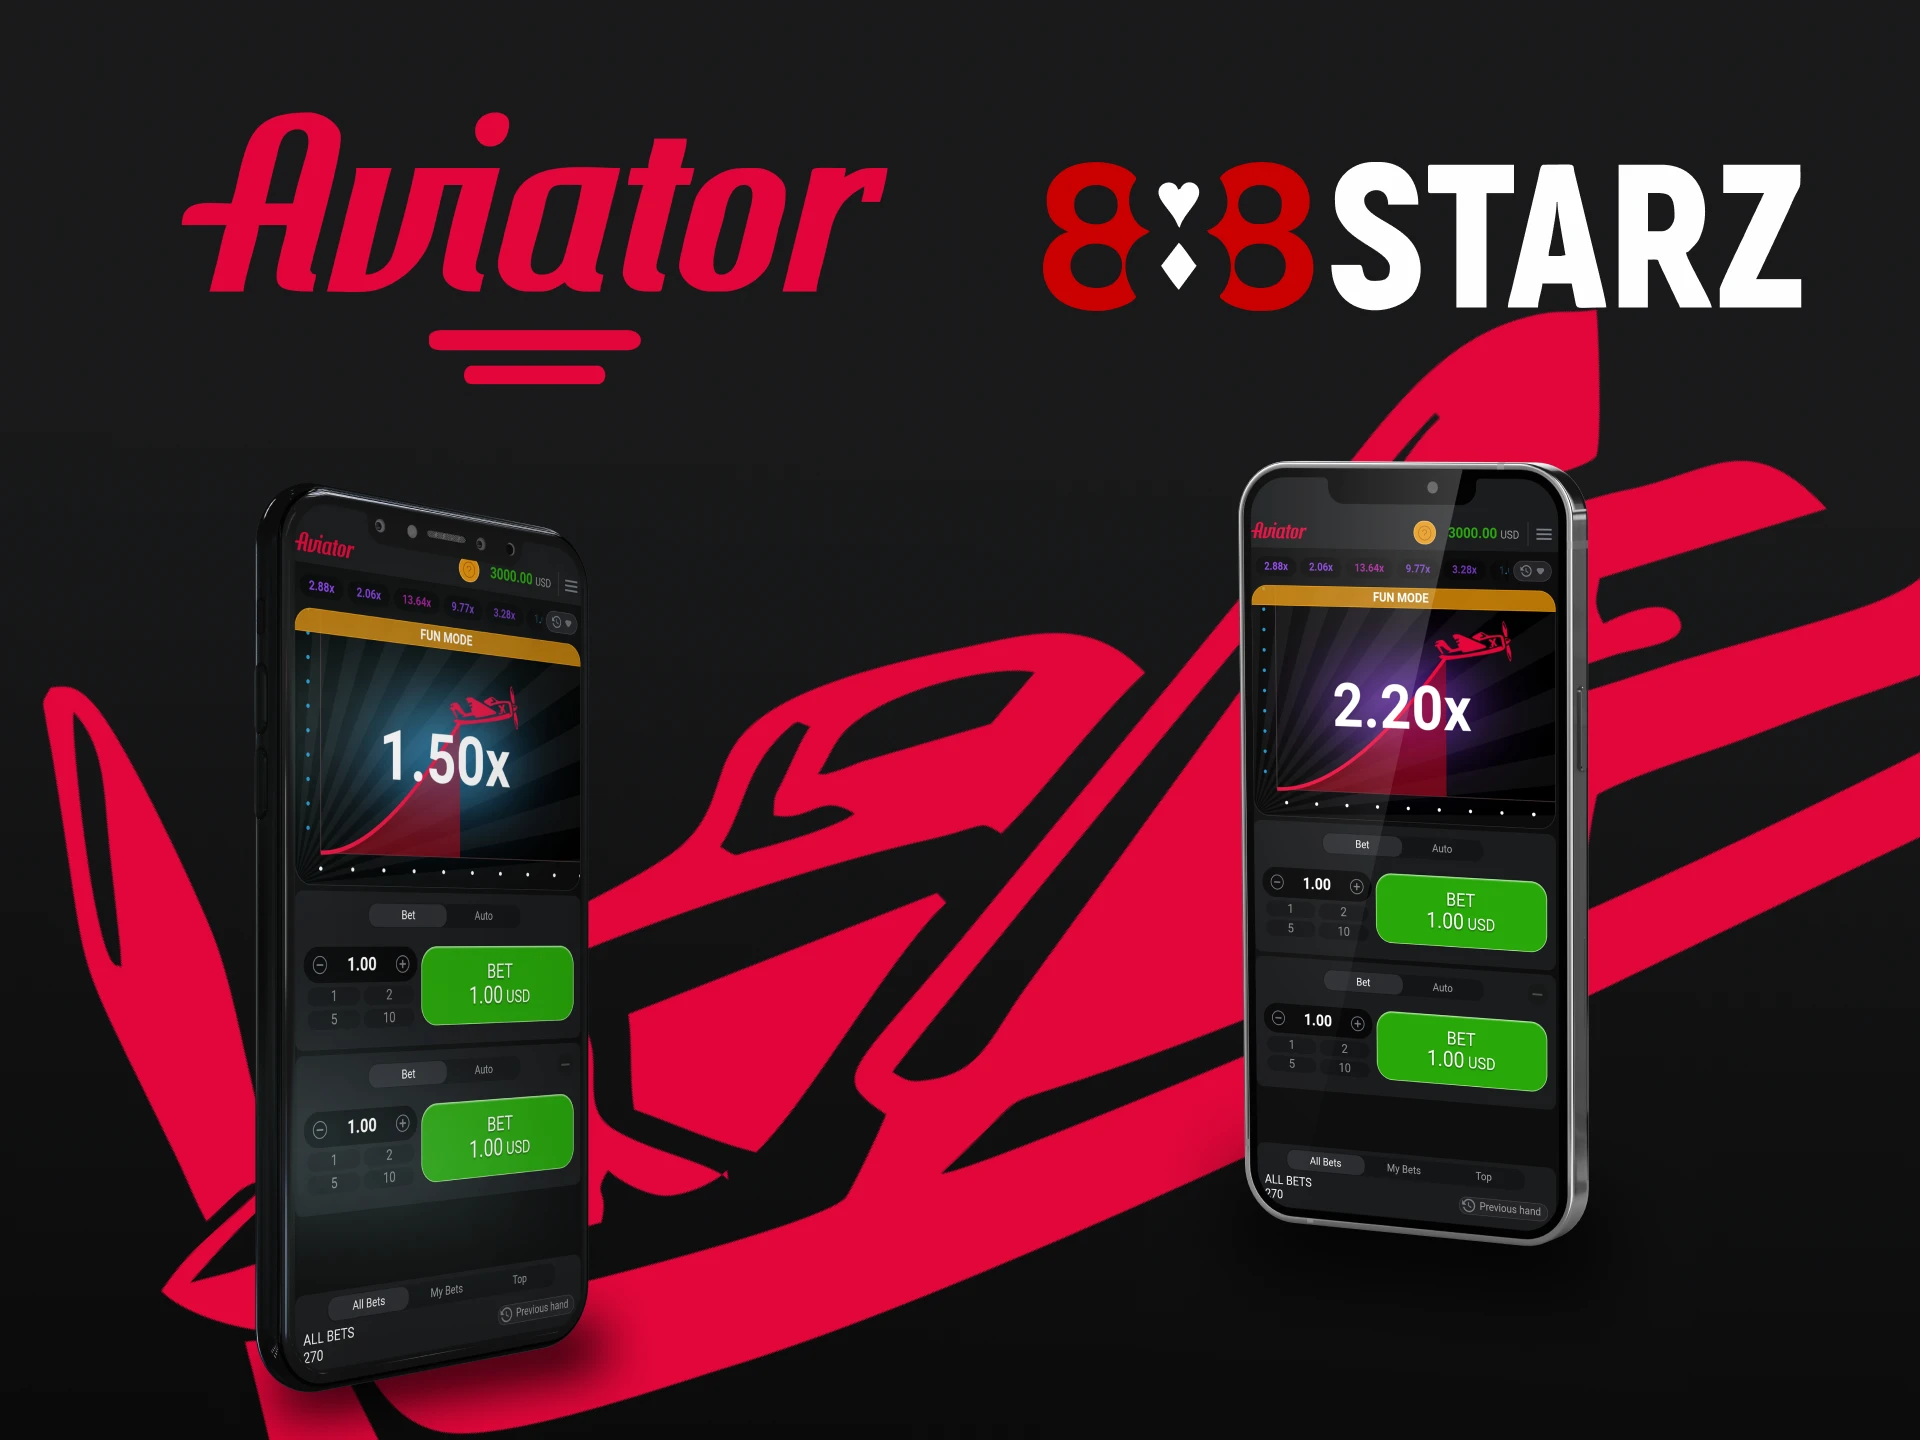 Choose your device to play Aviator through the 888starz app.